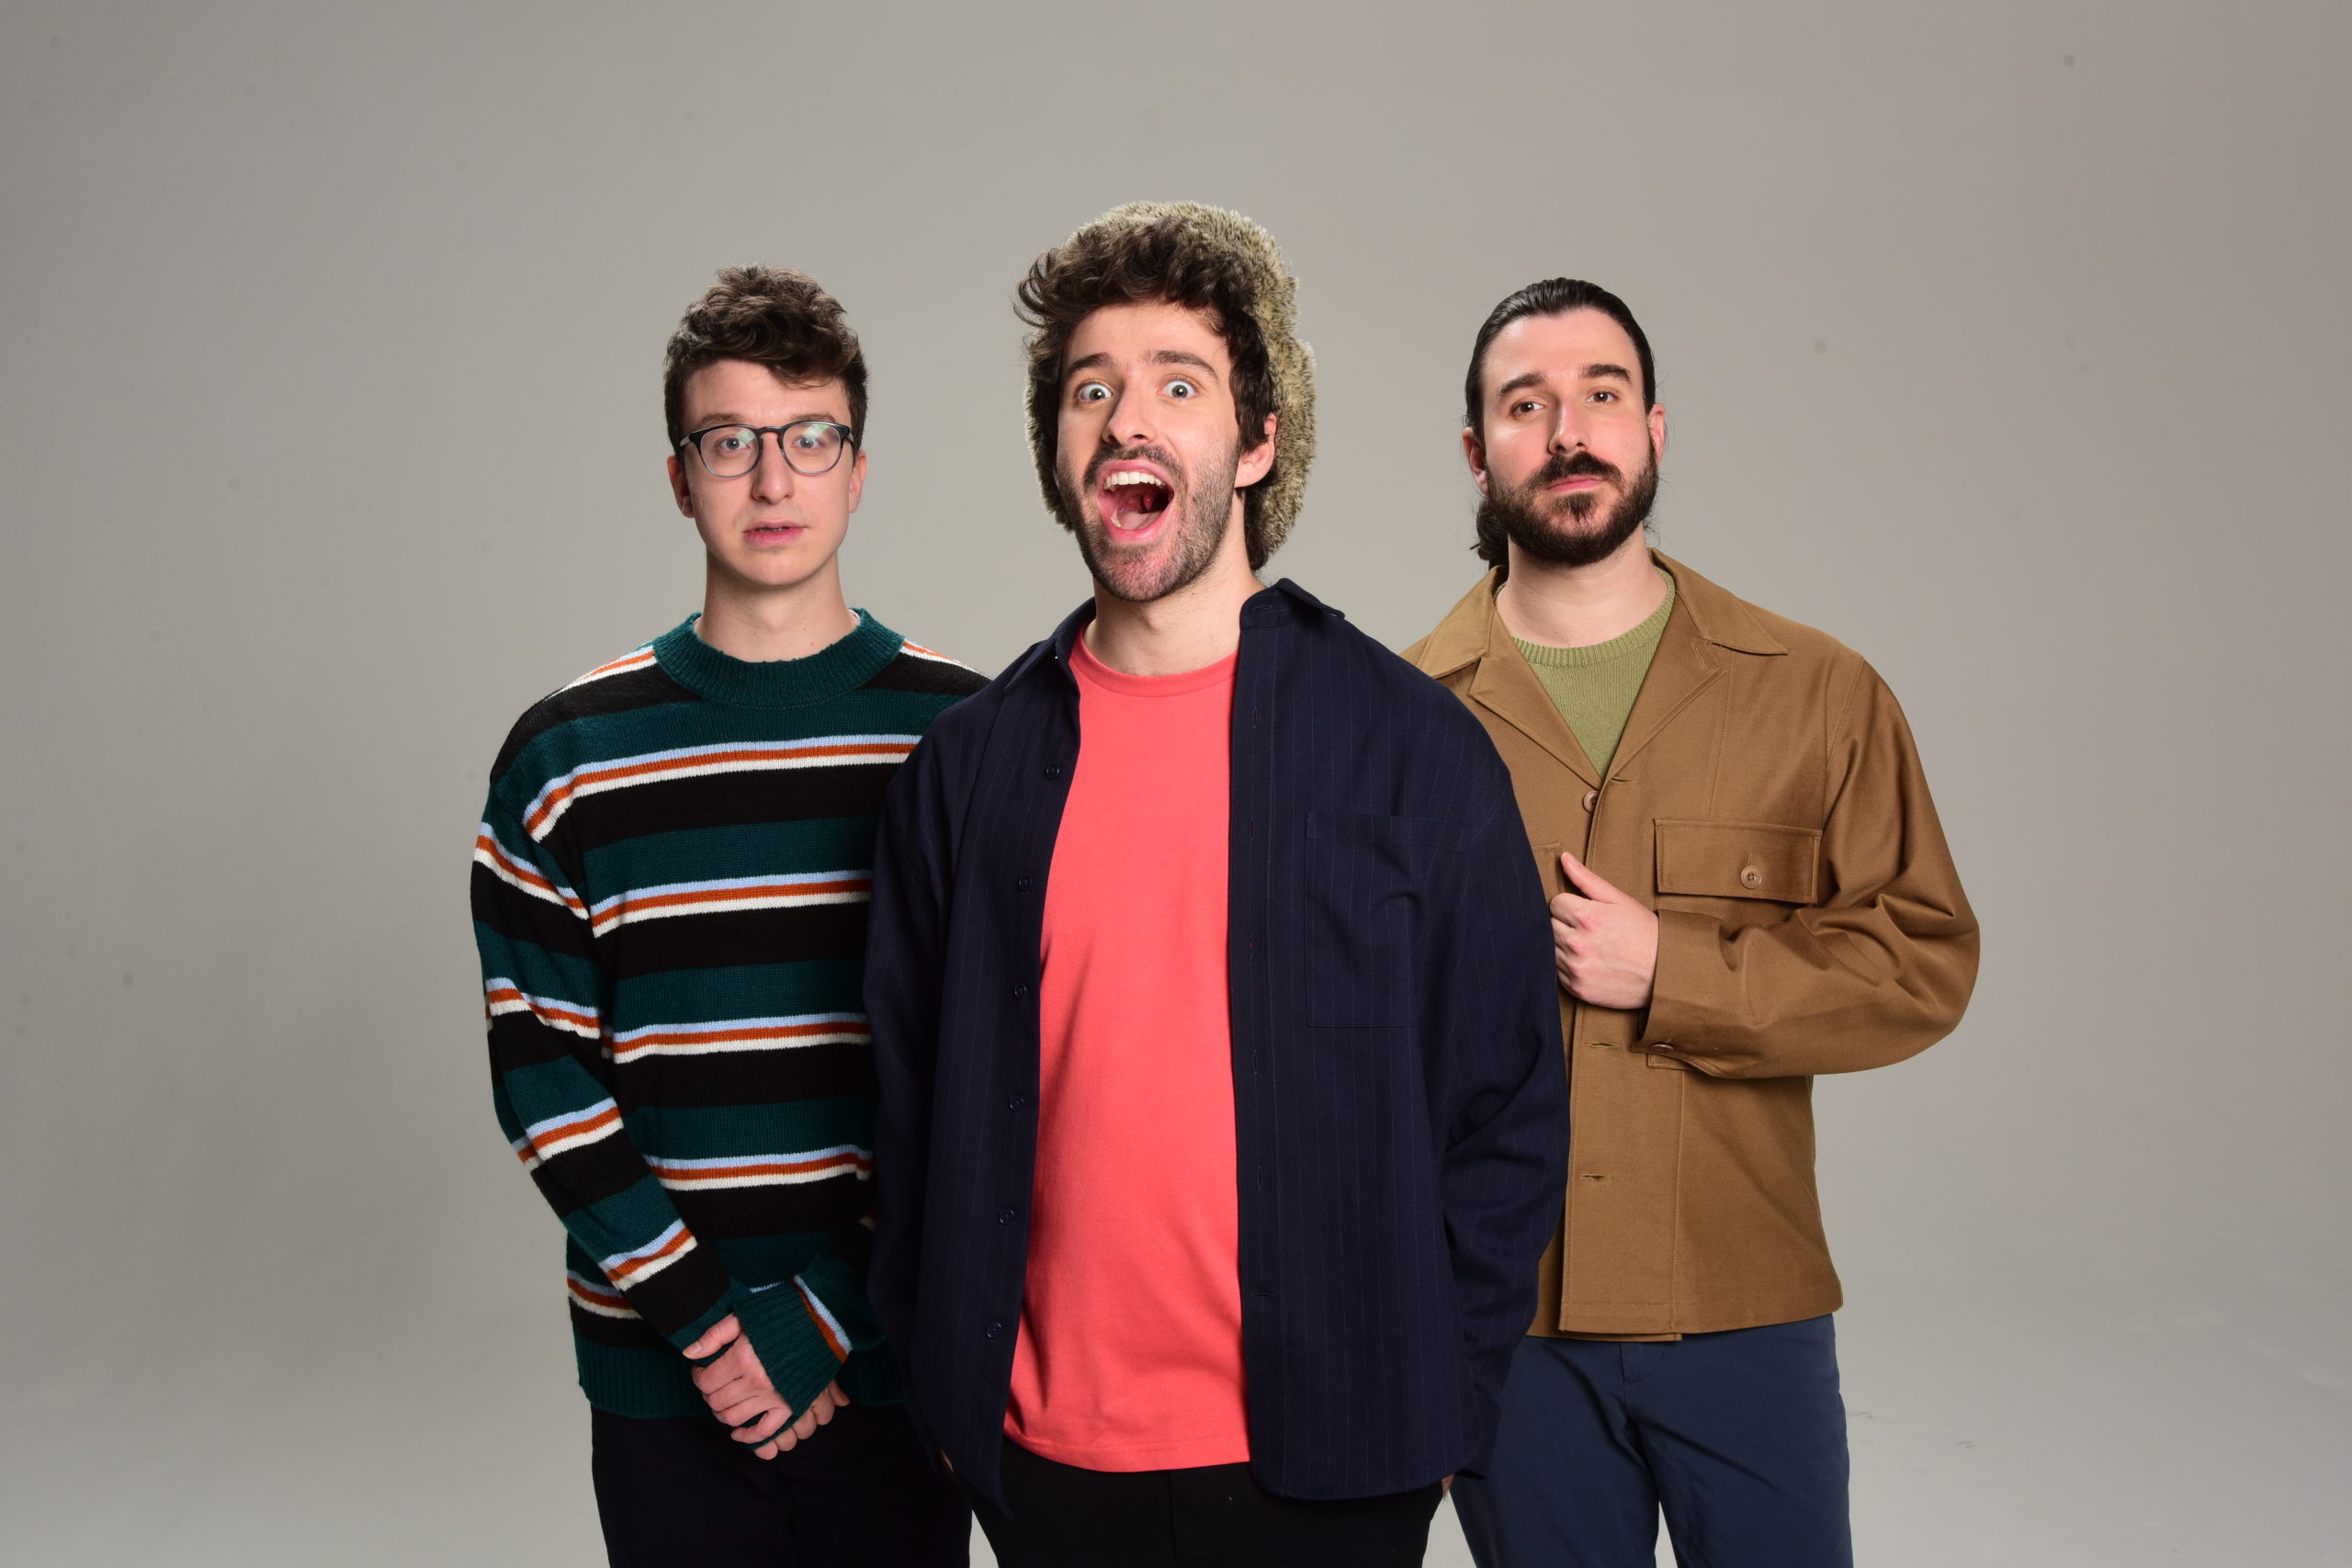 AJR music connection, Q&A session, Behind the scenes, Insider info, 2560x1710 HD Desktop